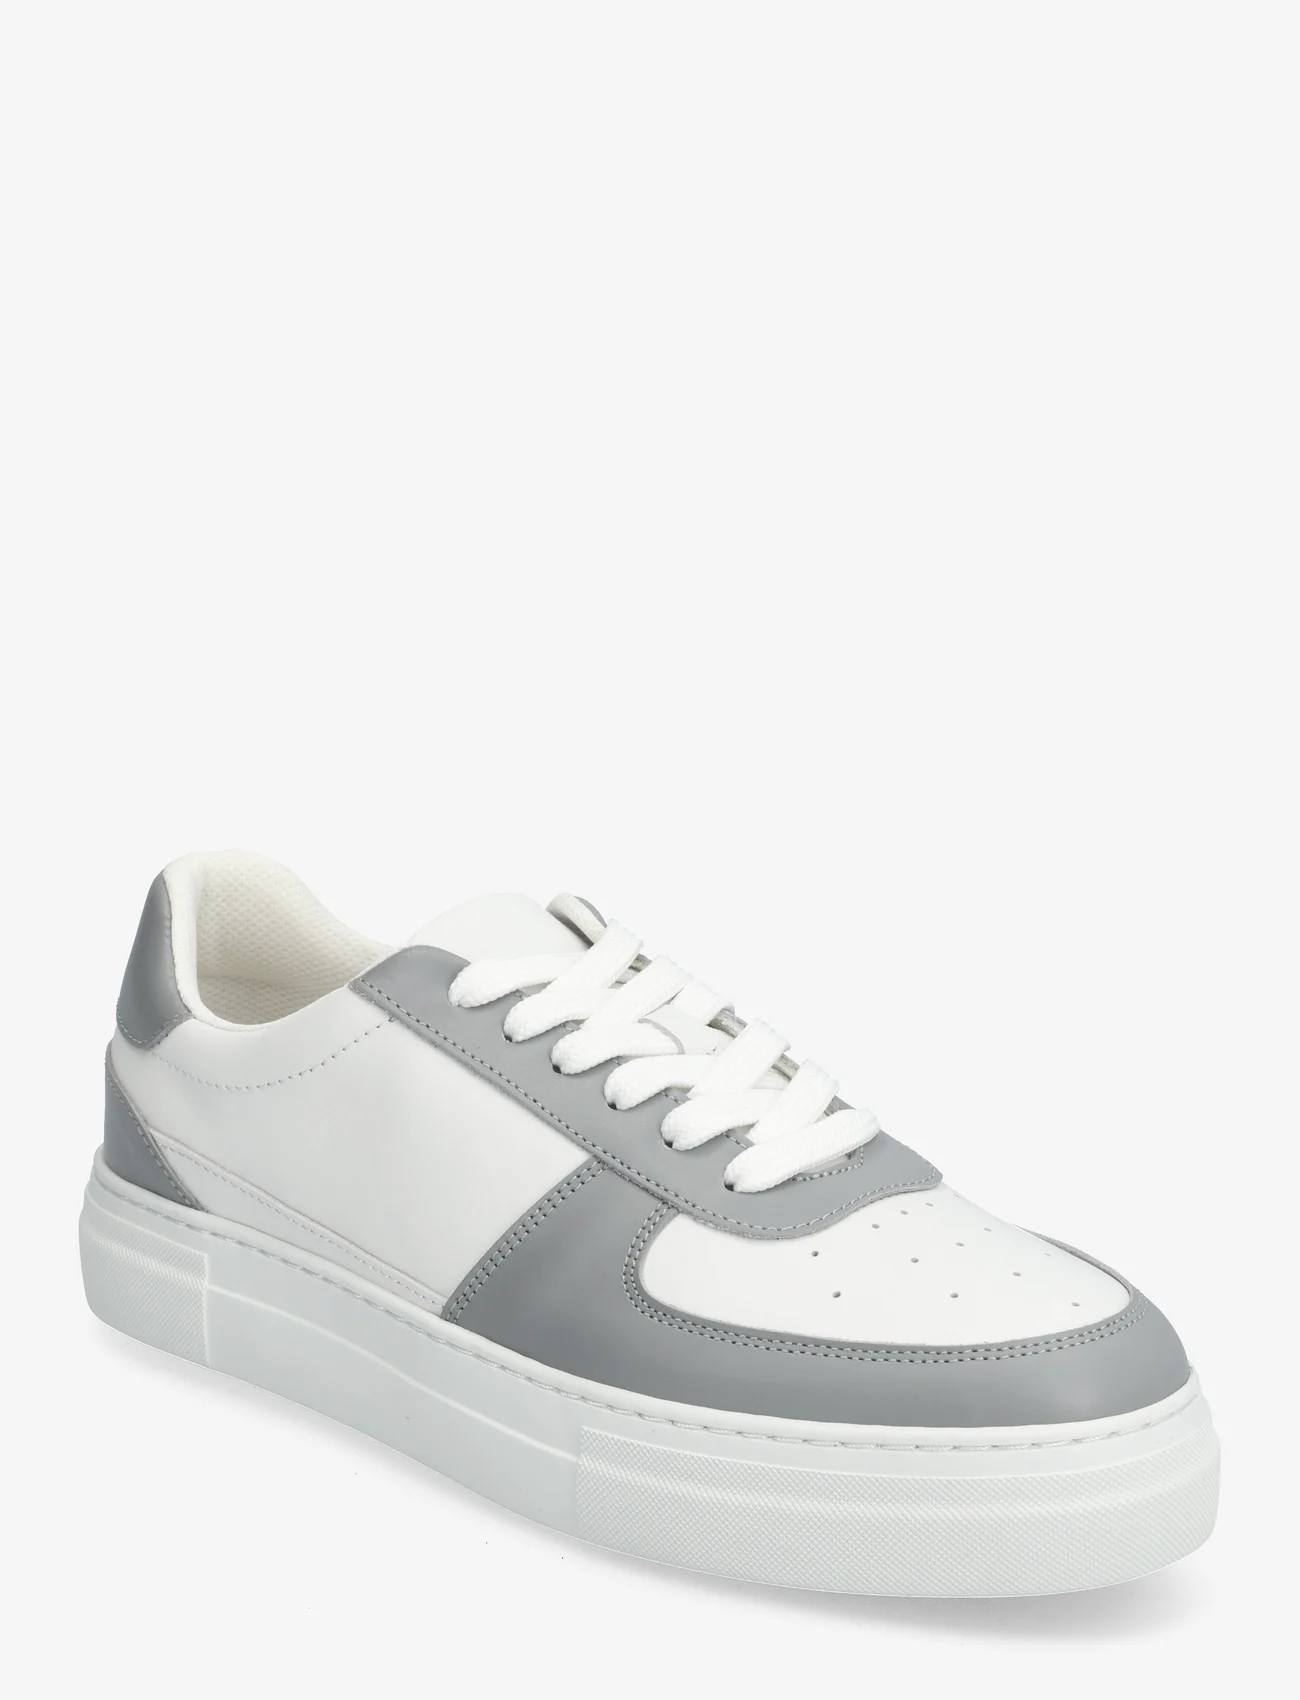 Selected Homme - SLHHARALD LEATHER SNEAKER - låga sneakers - grey - 0